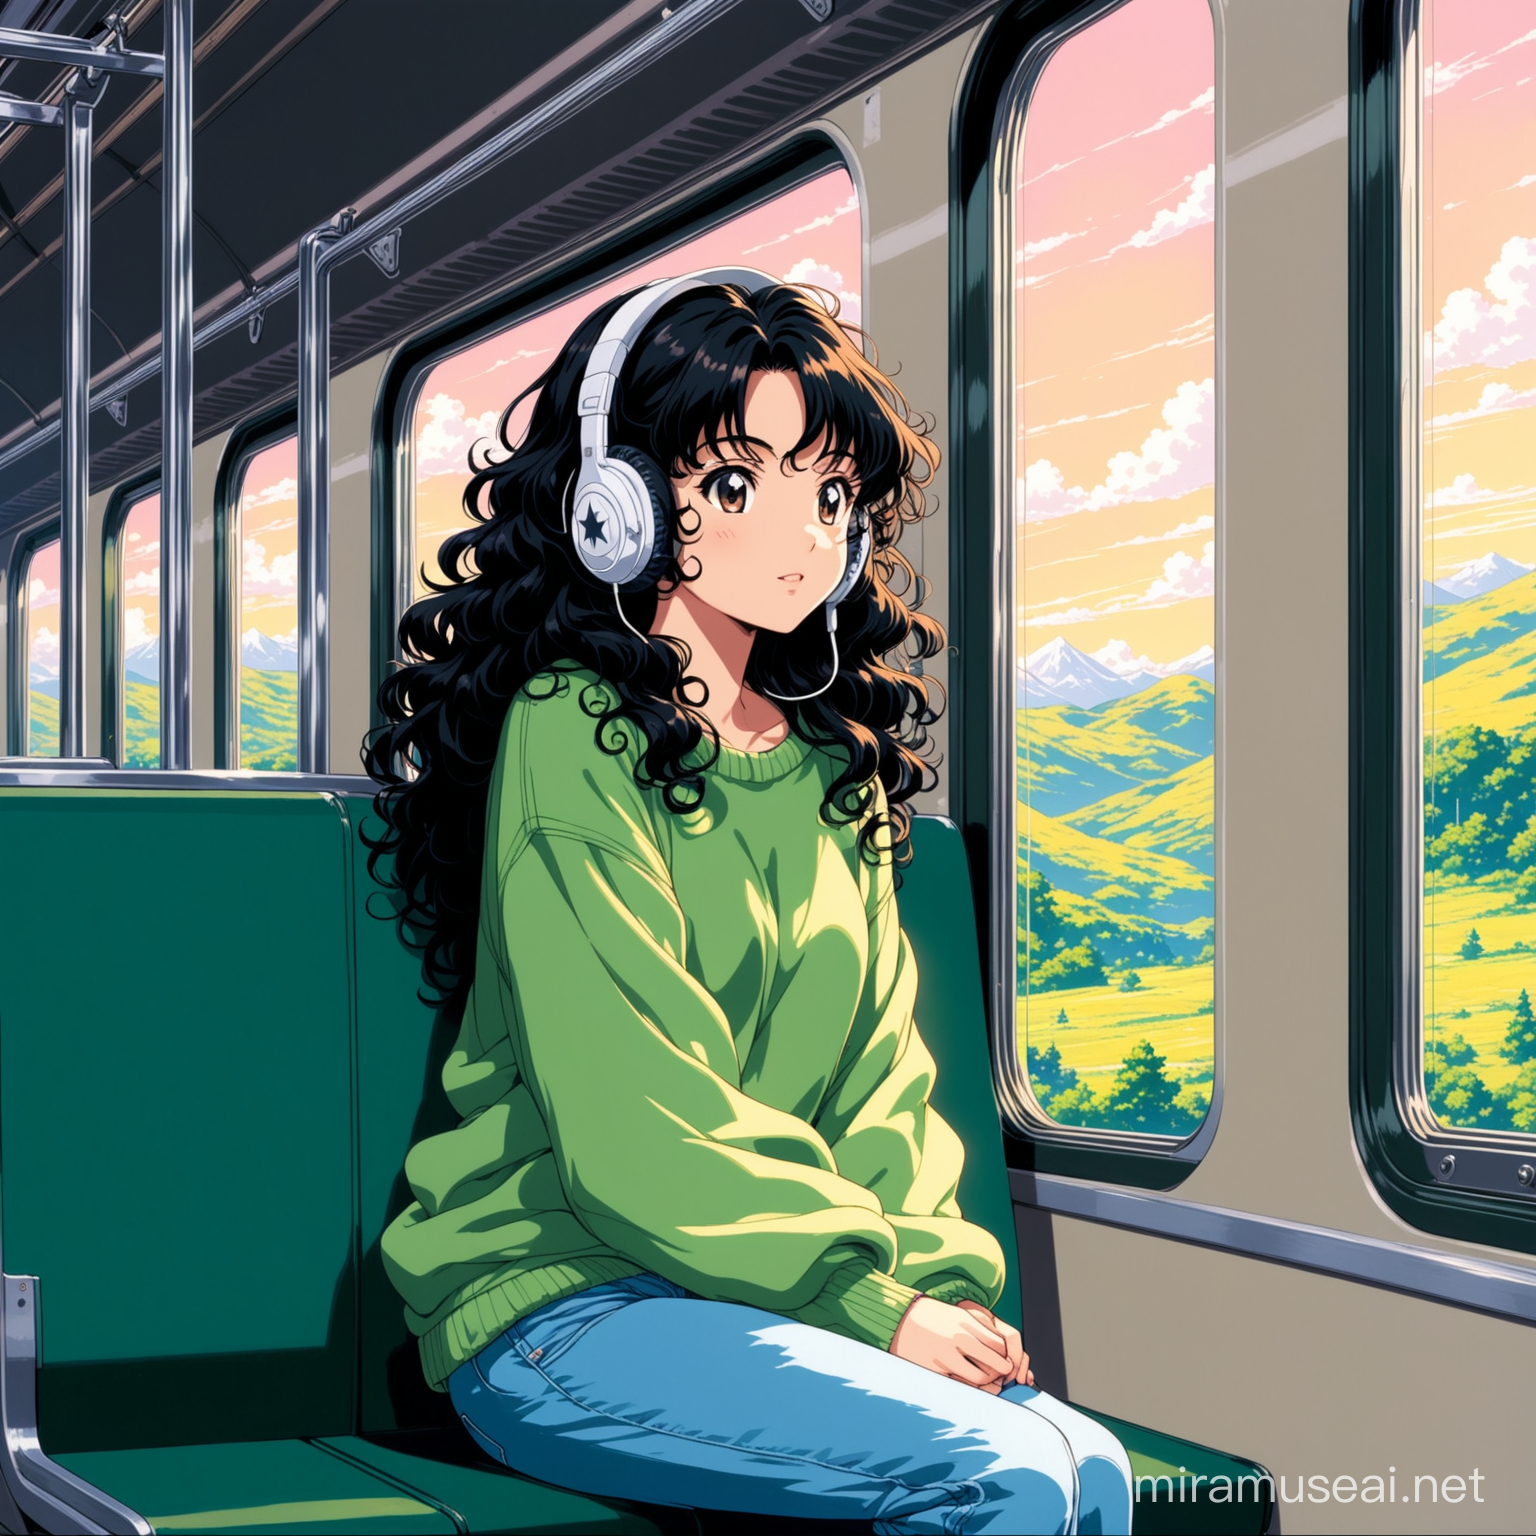 90s anime, detailed,scenic,pretty black with medium length puffy black curly hair sitting in a train and wearing headphones, girl should be looking out the window and wearing a sweater, jeans and converse shoes